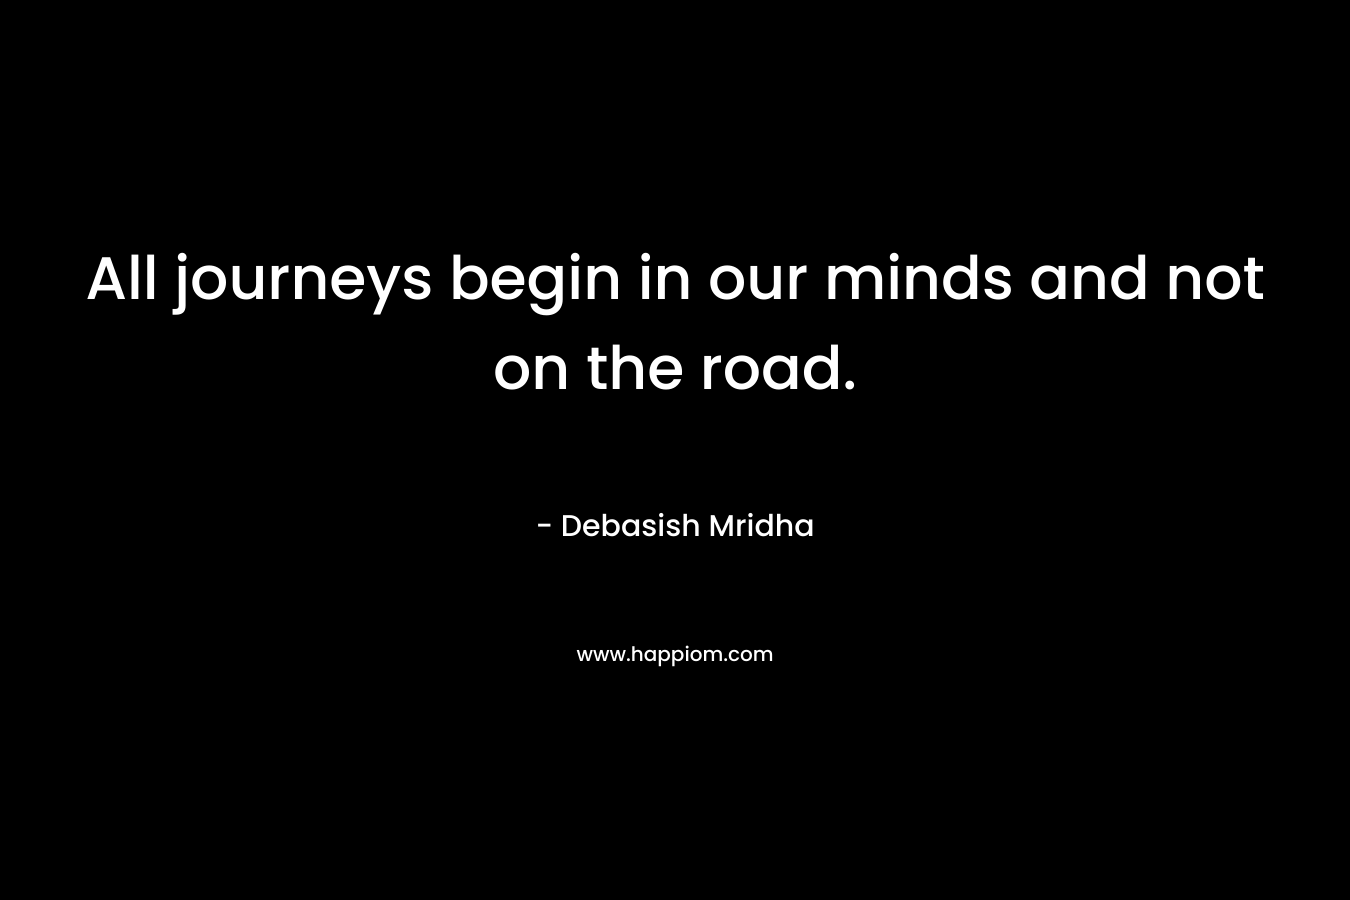 All journeys begin in our minds and not on the road.